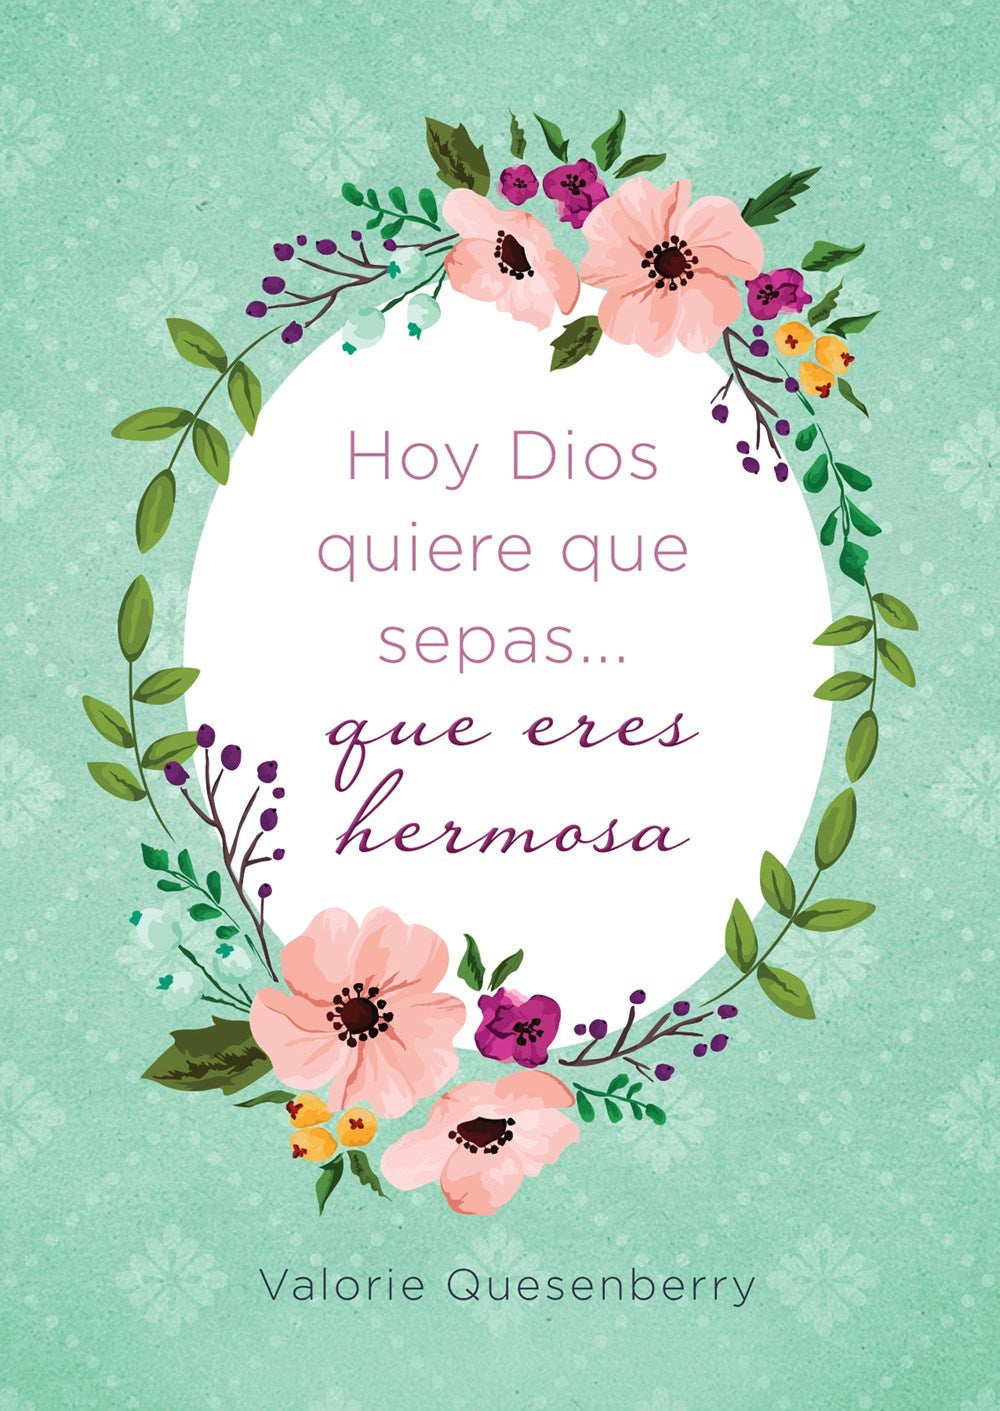 Spanish-Today God Wants You To Know...You Are Beautiful (Hoy Dios Quiere Que Sepas... Que Eres Hermosa)